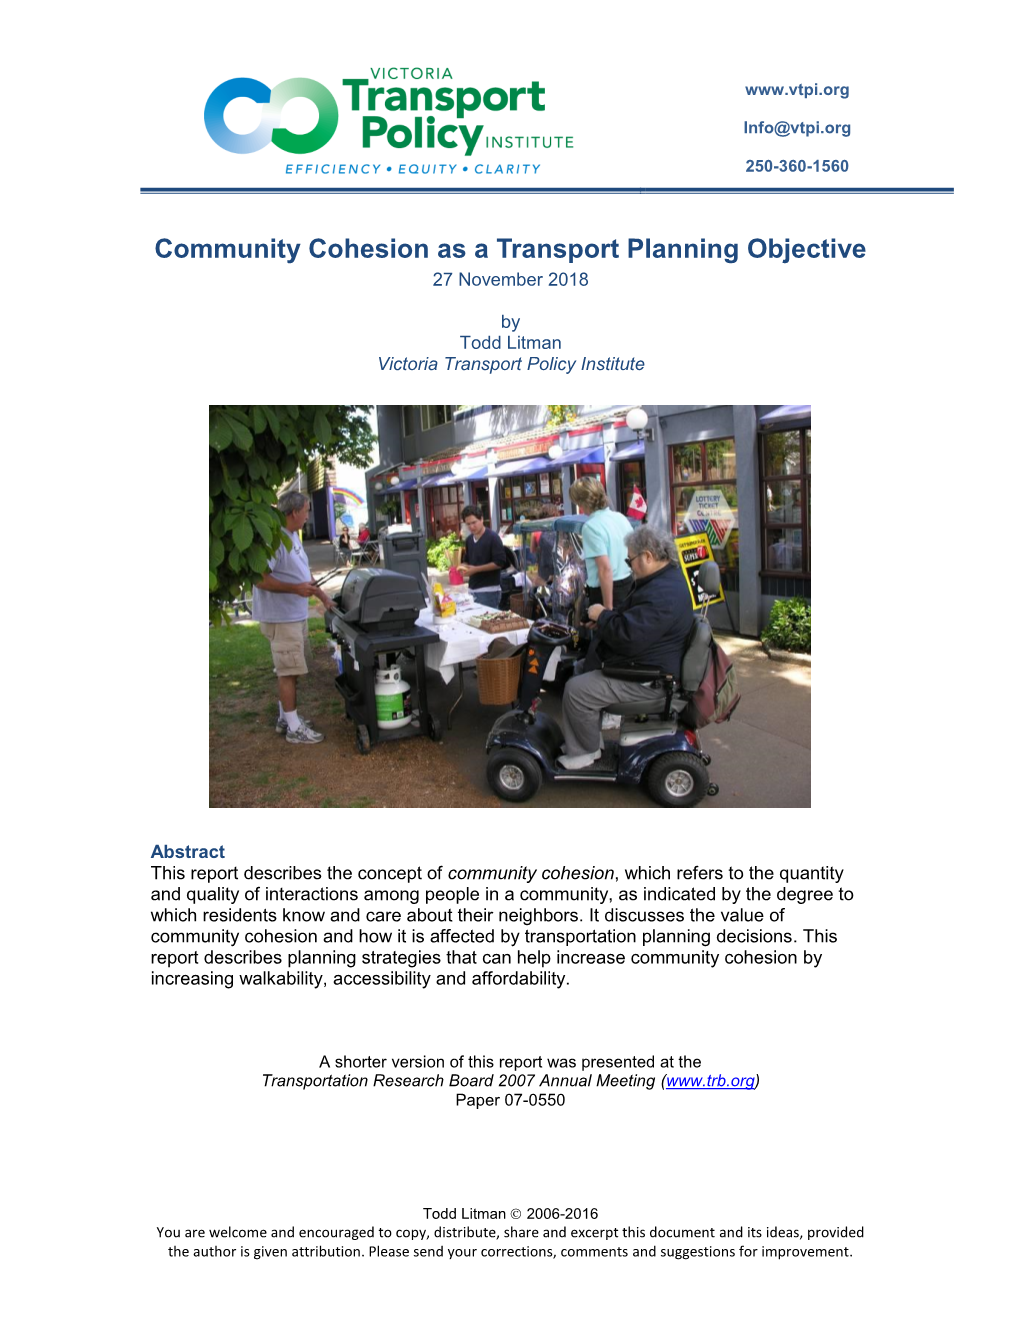 Community Cohesion As a Transport Planning Objective 27 November 2018